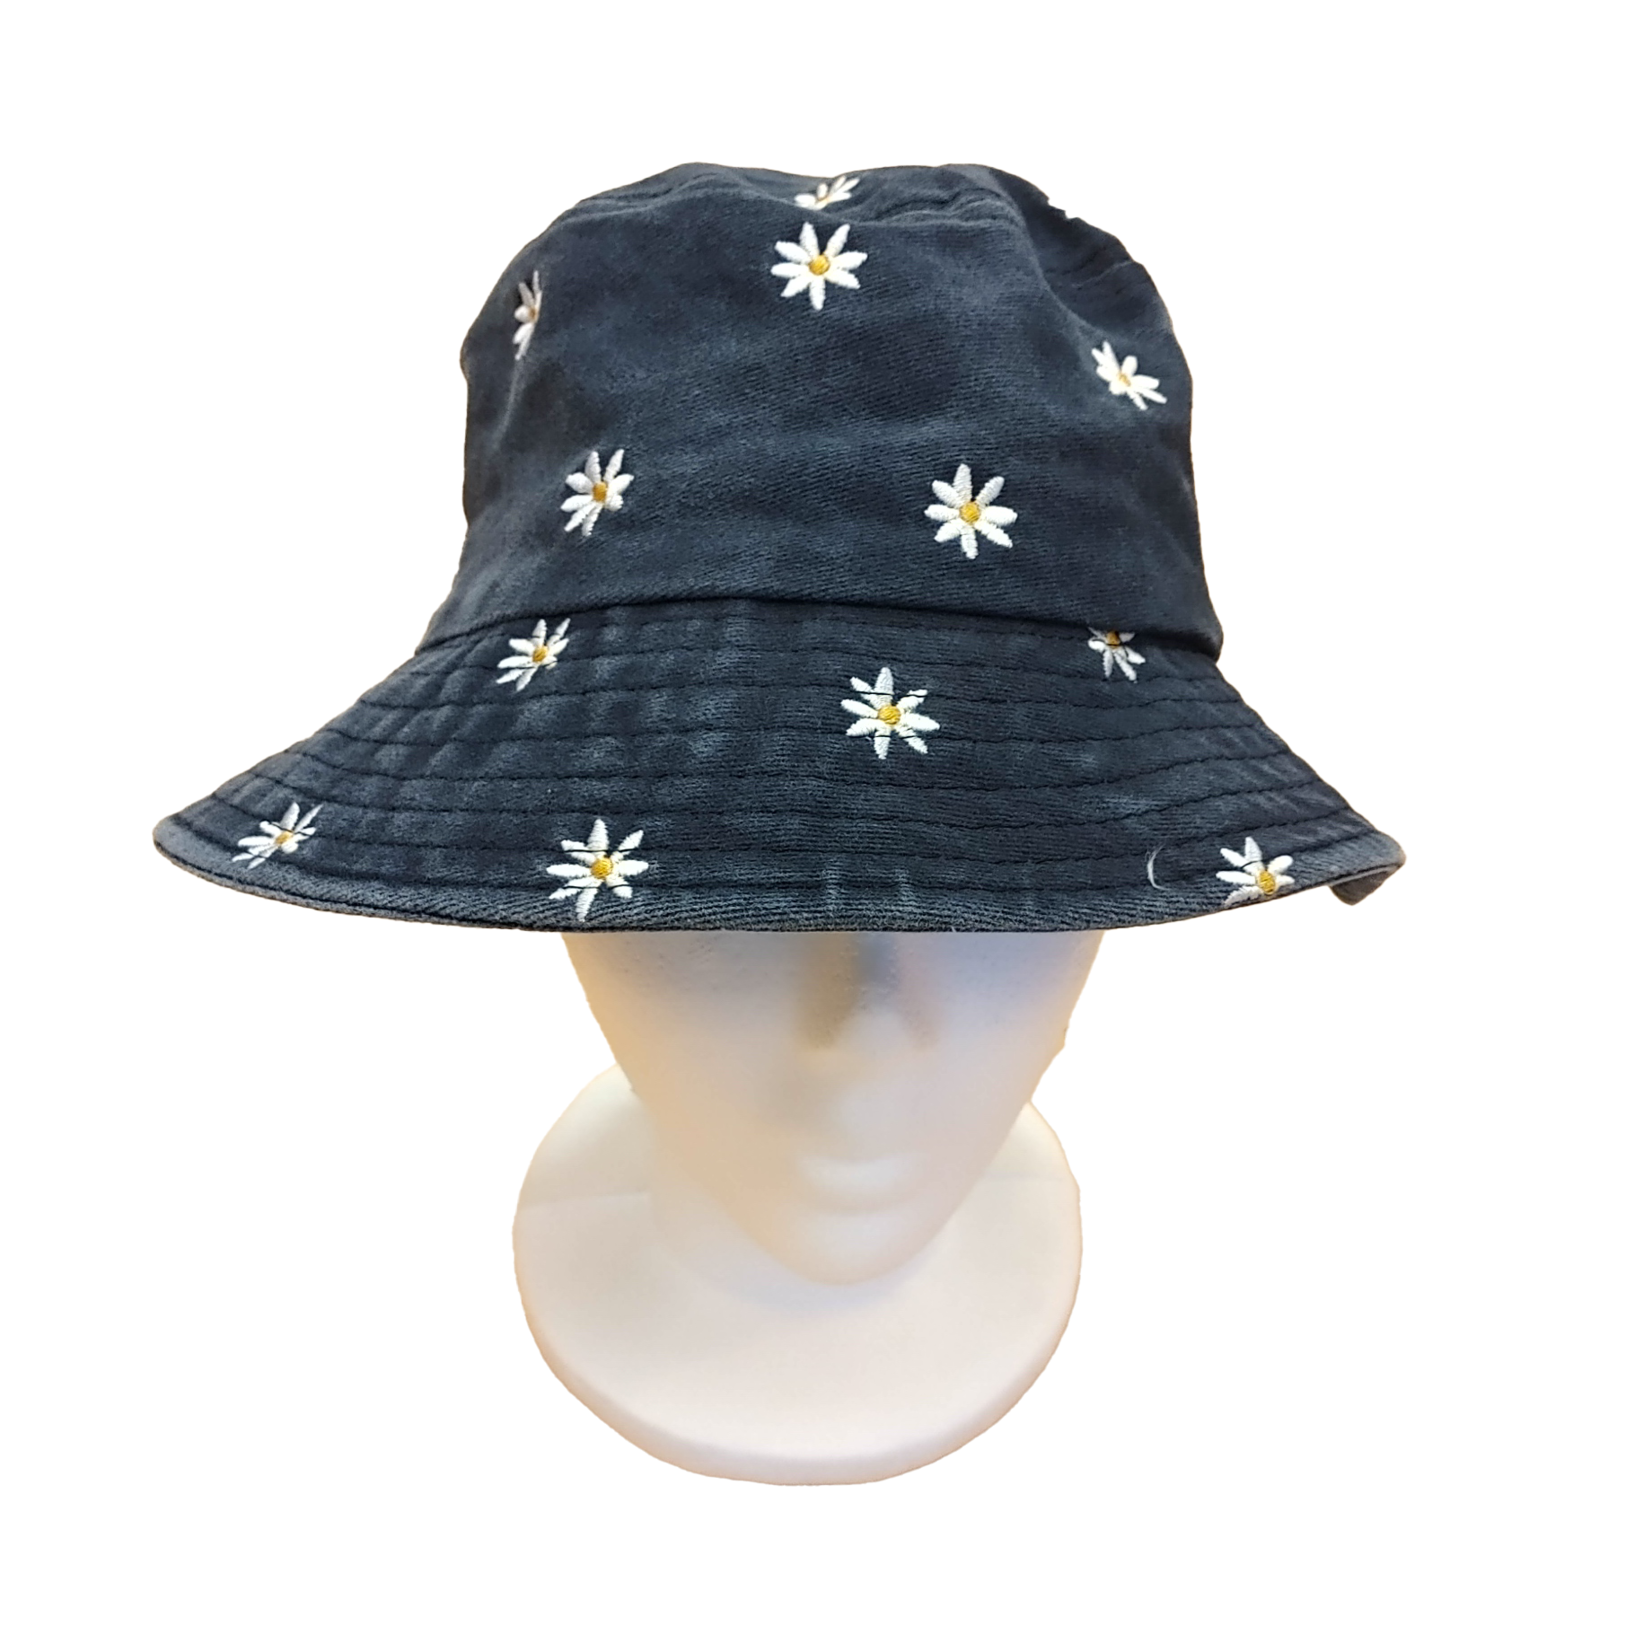 Picabo Picabo denim daisy print hat